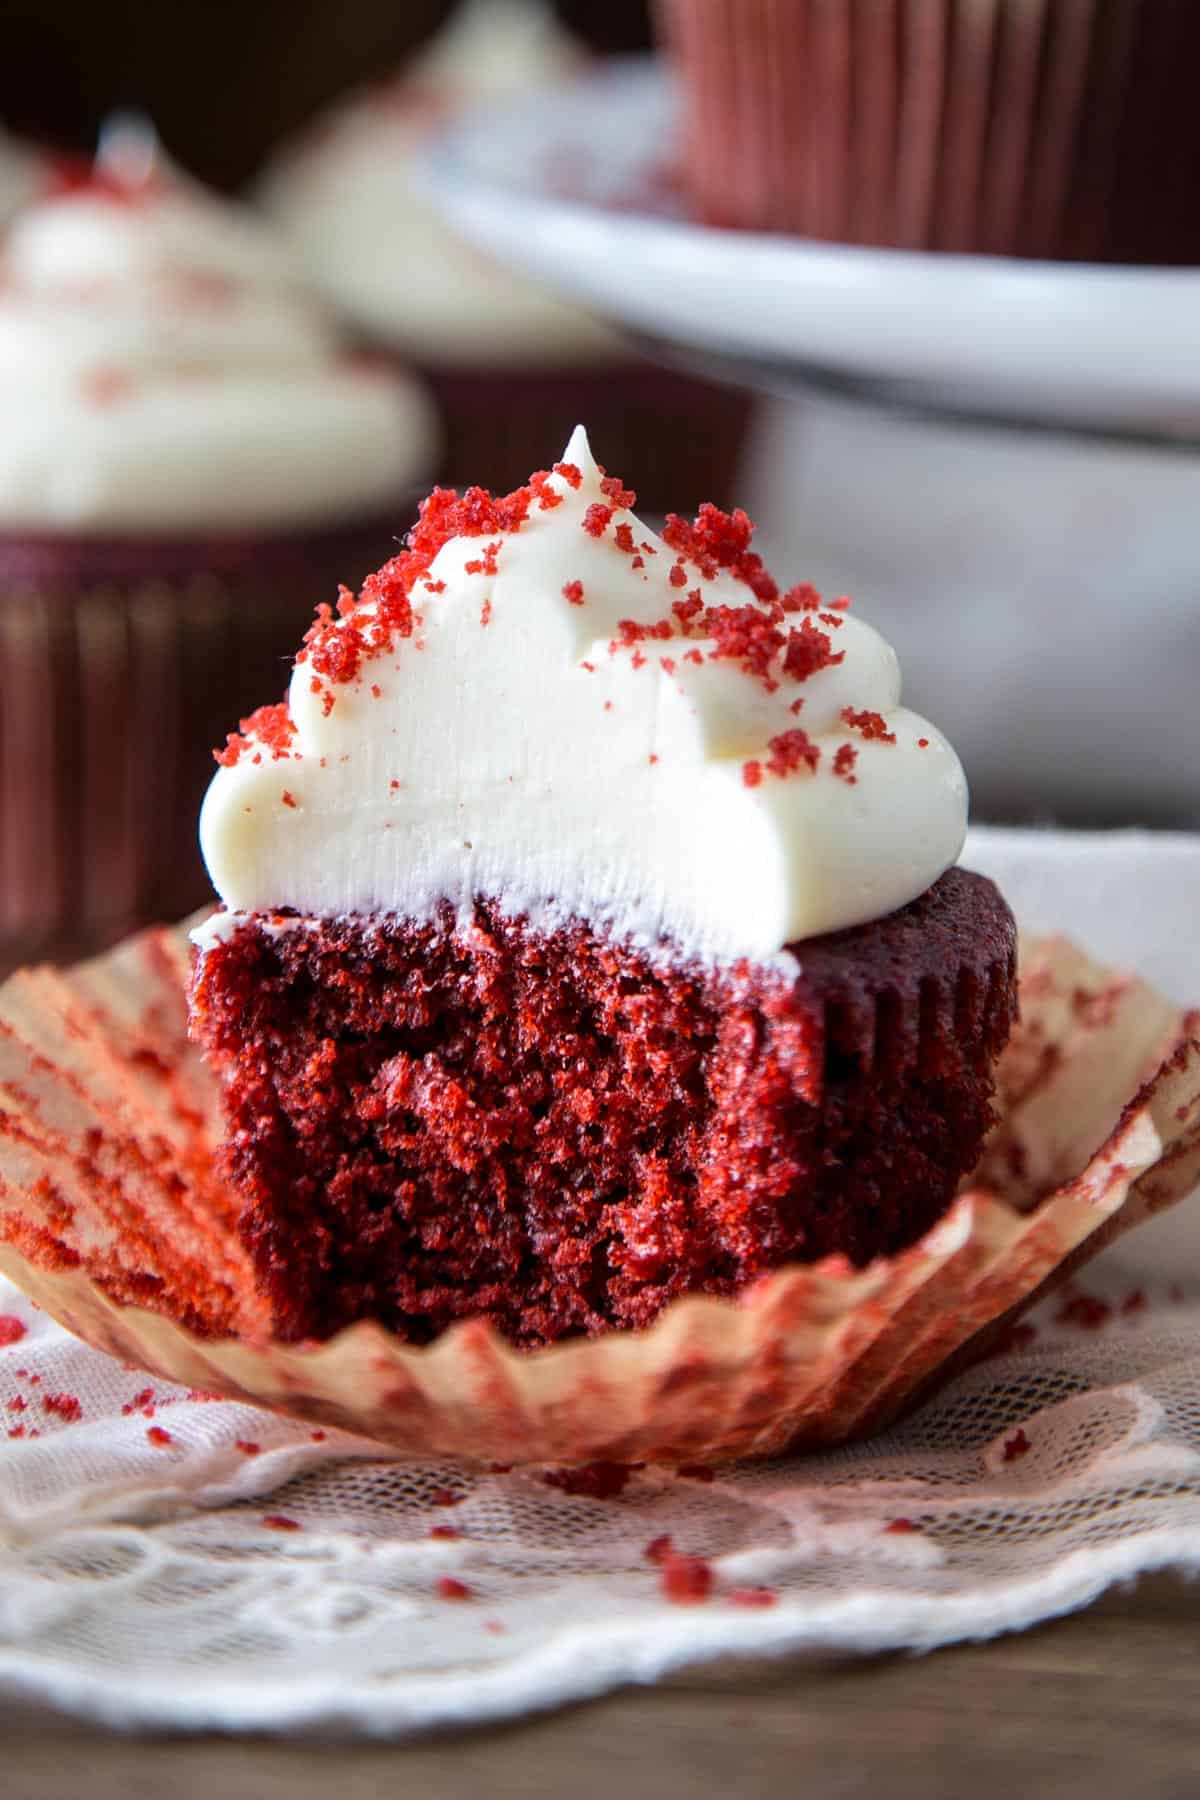 Cream cheese frosting on a red velvet cupcake.